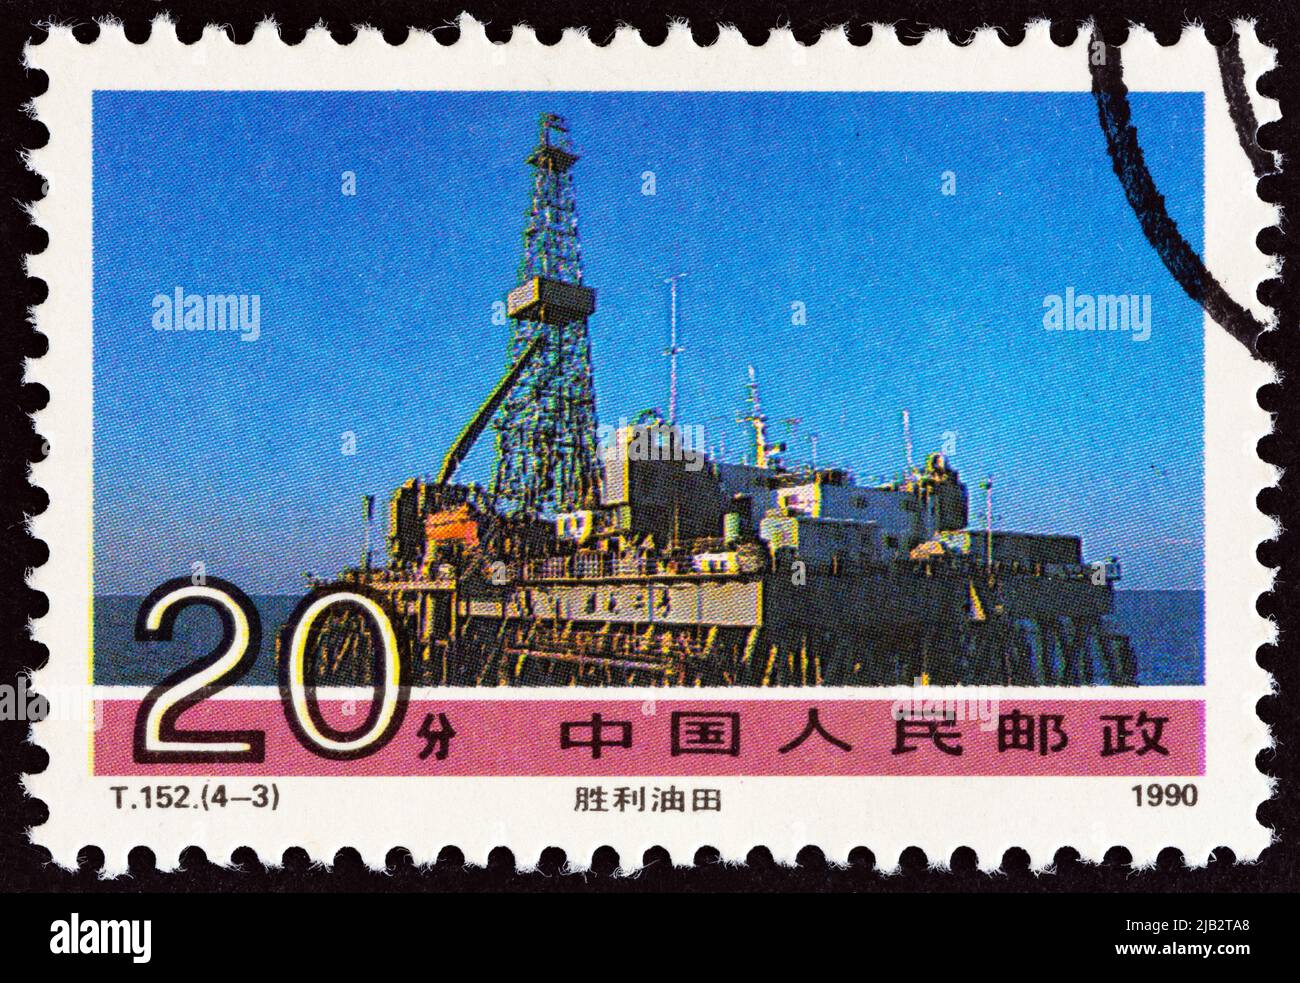 CHINA - CIRCA 1990: A stamp printed in China from the 'Achievements of Socialist Construction' issue shows Shengli oil field, circa 1990. Stock Photo